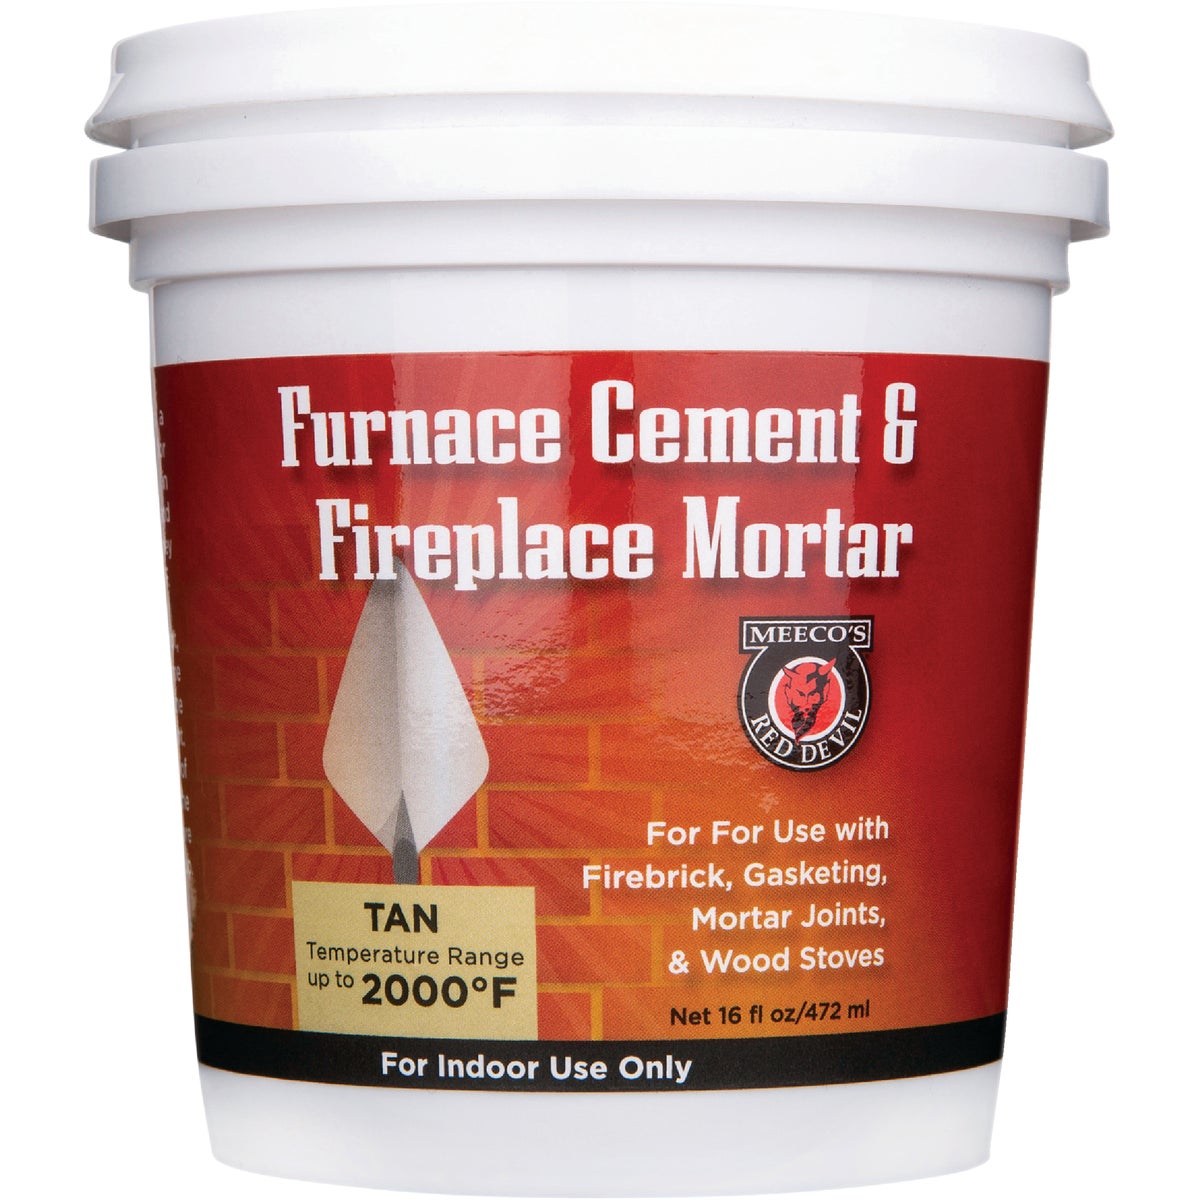 Meeco's Red Devil 1 Pt. Tan Furnace Cement & Fireplace Mortar